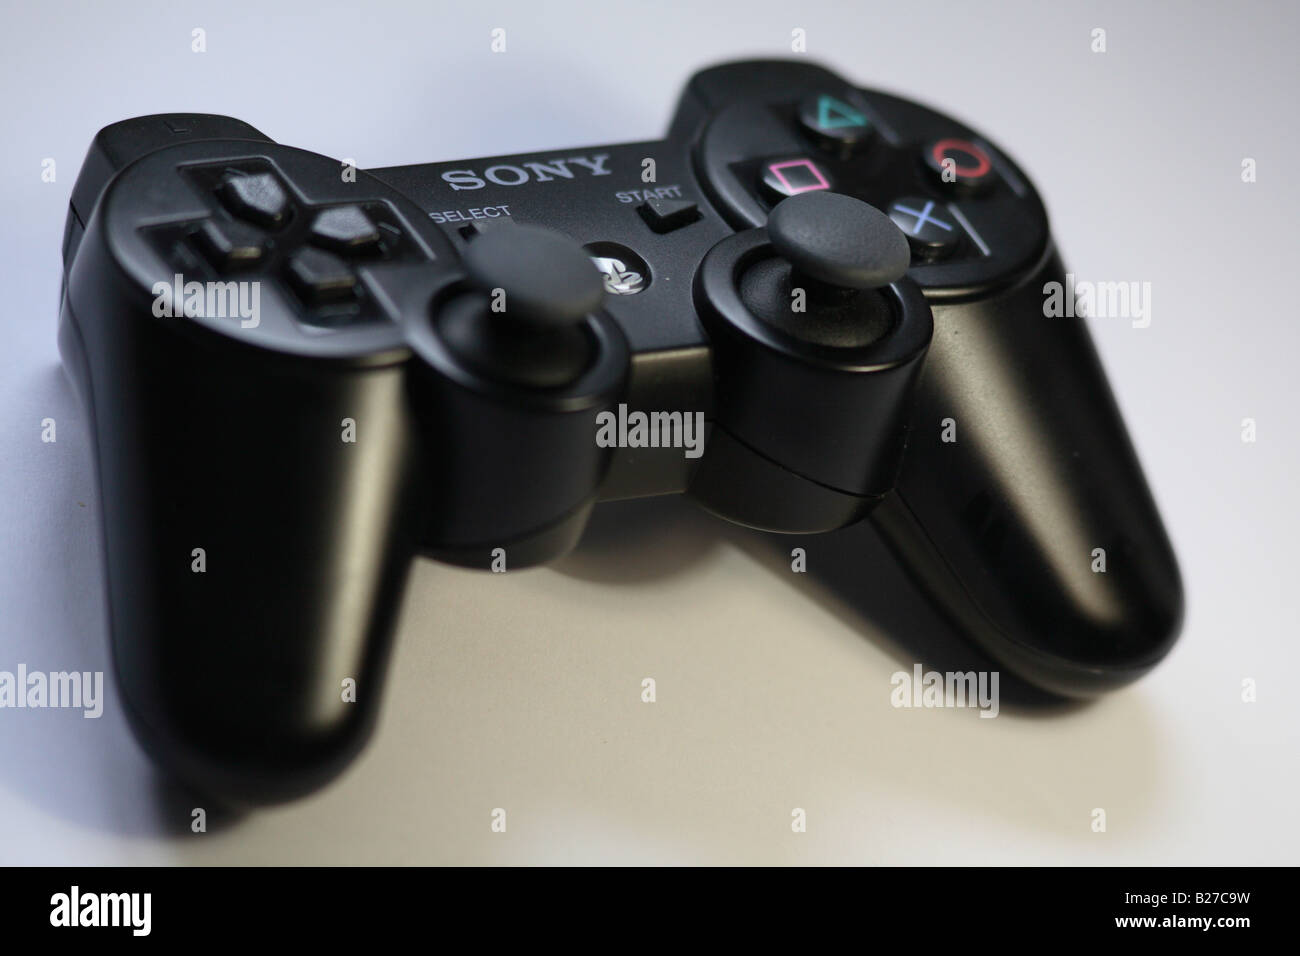 Playstation 3 wireless controller Stock Photo